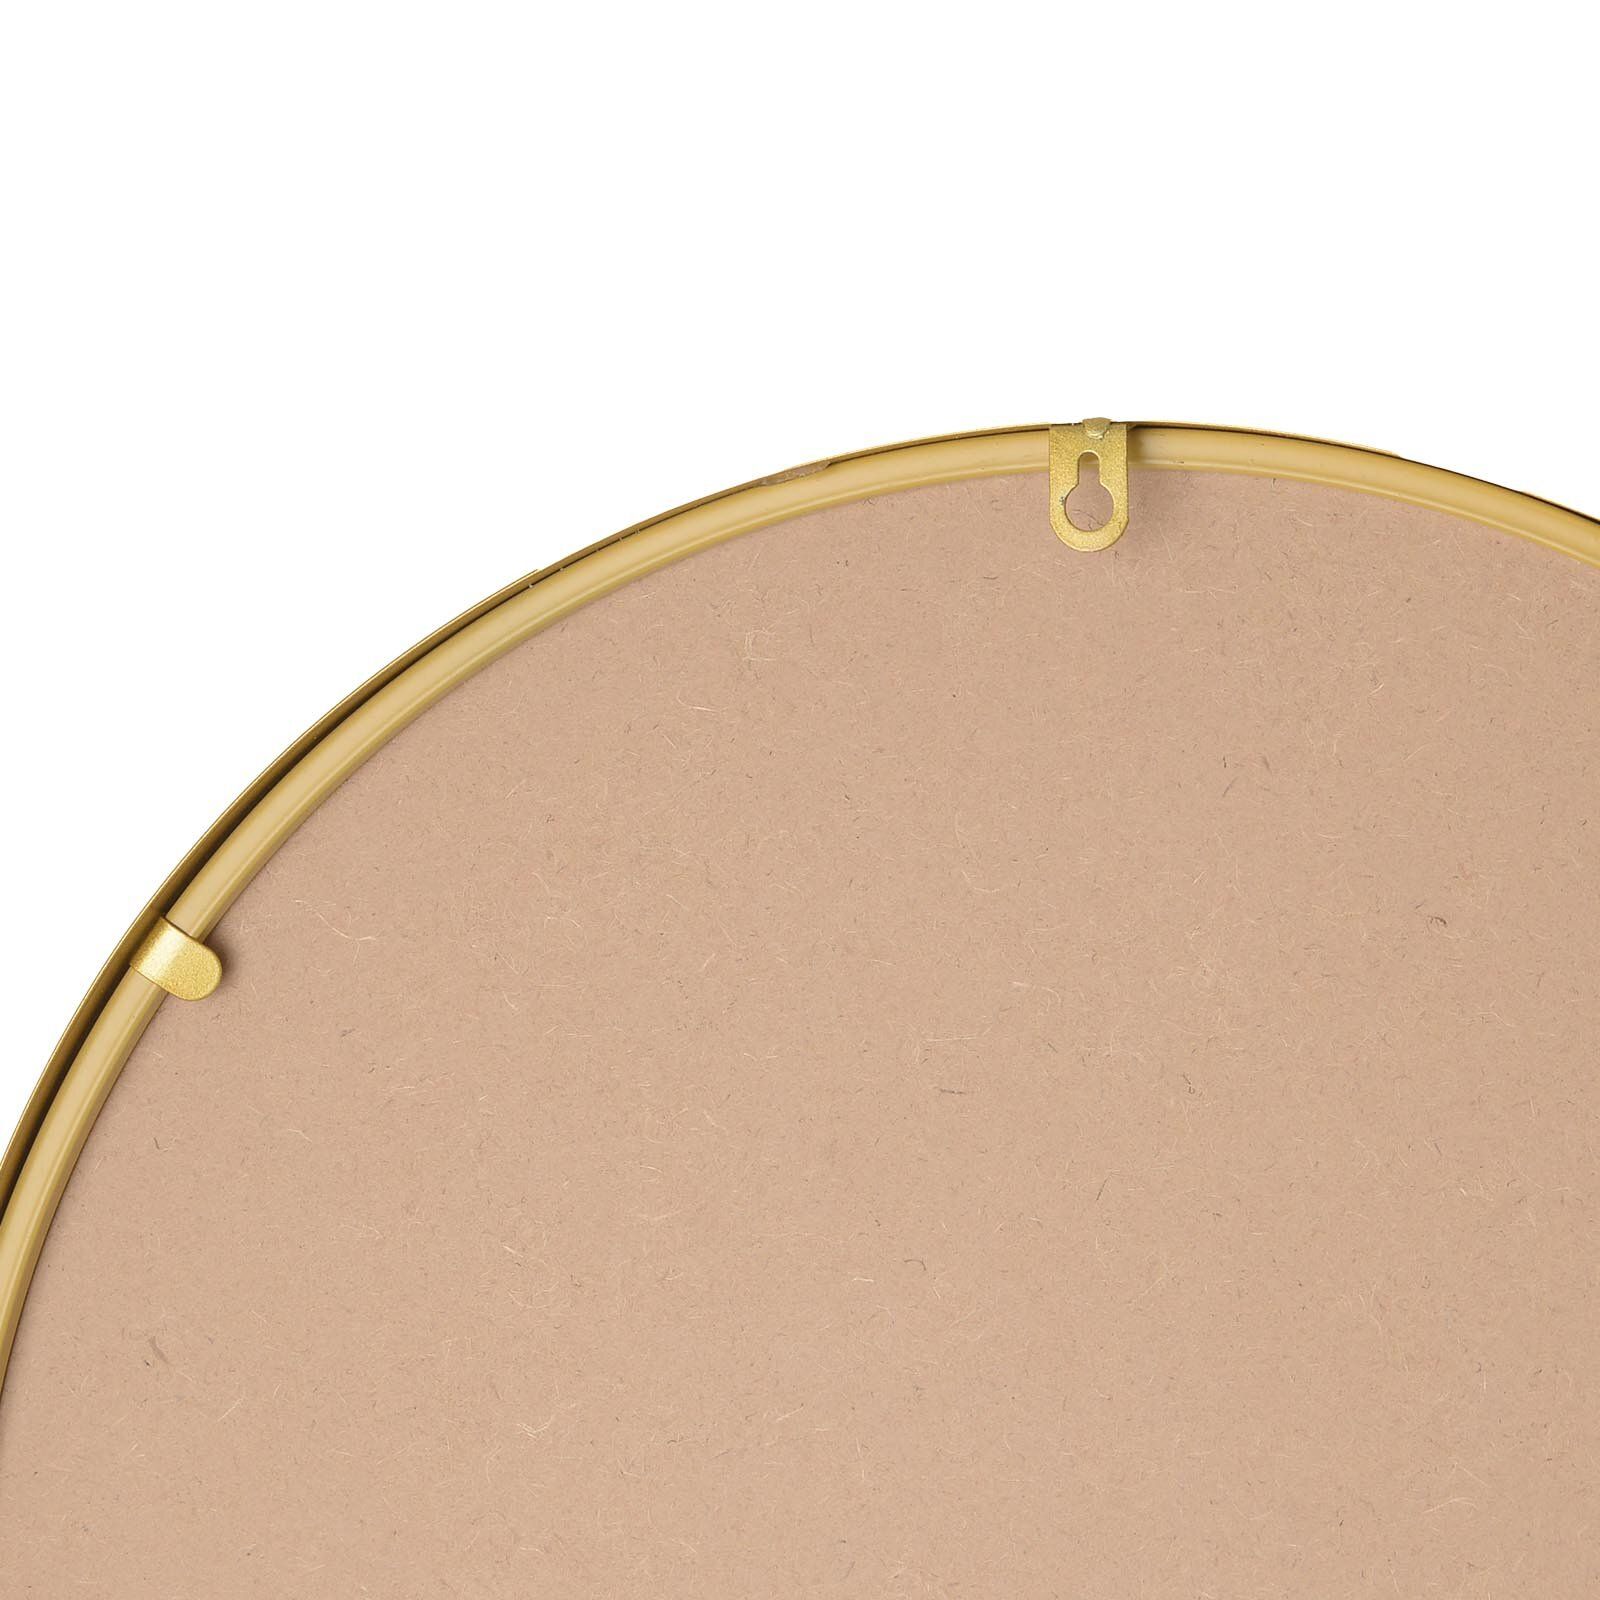 Large Round Gold Wall Mirror Brushed Gold Metal Frame Round Mirror On Onbuy Intended For Brushed Gold Wall Mirrors (View 7 of 15)